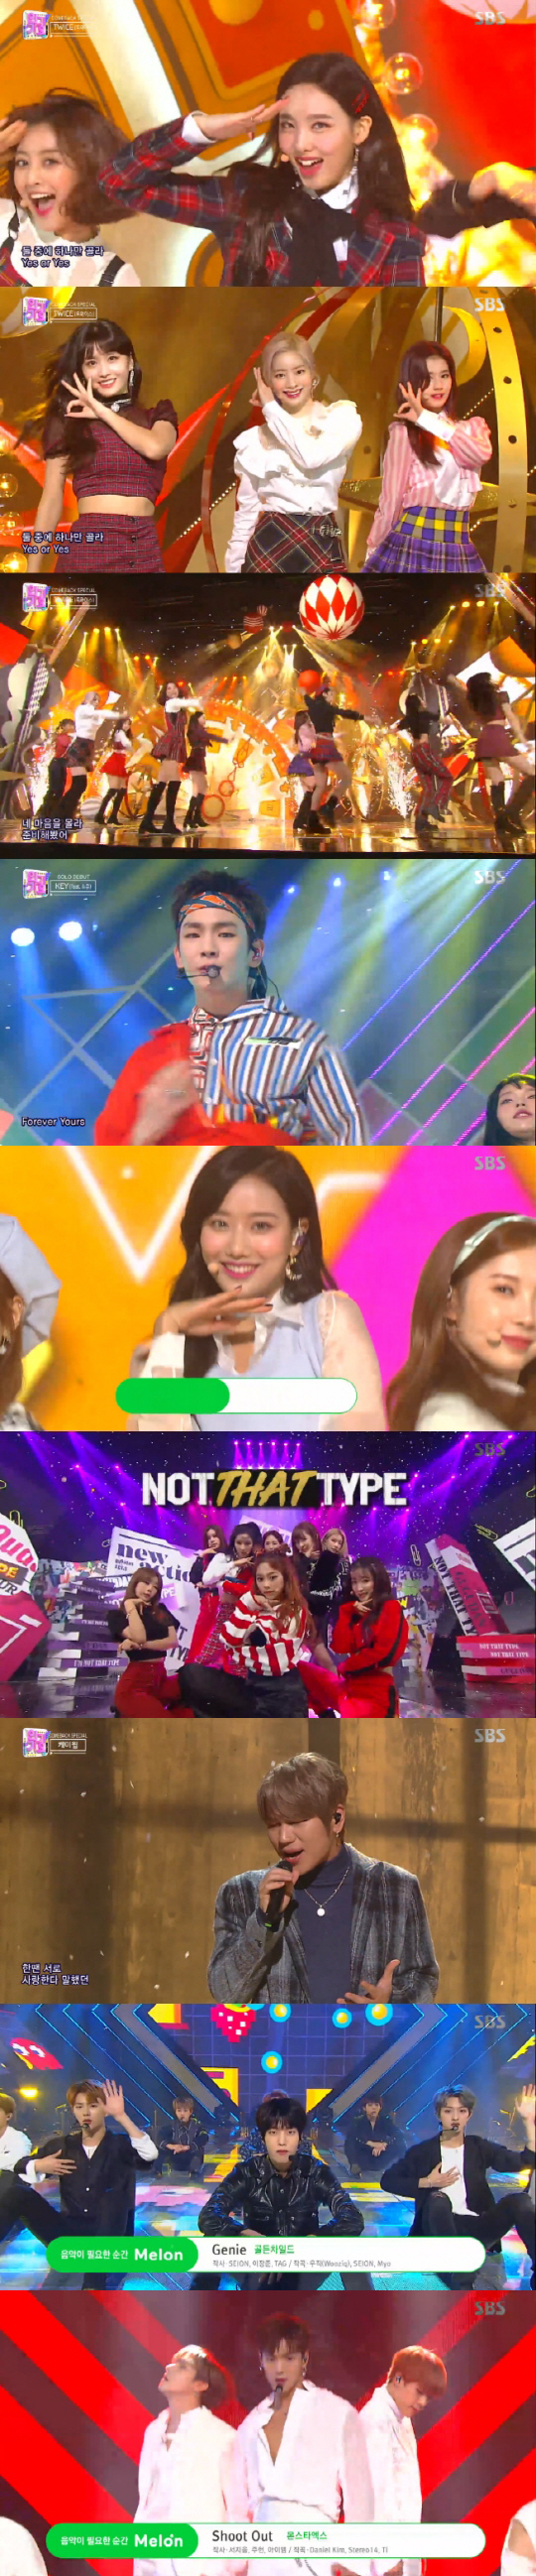 ..TWICE comeback and null solo debutpopular song Paul Kim gets first placetook the place.On SBS Inkigayo, which was broadcast live on the 11th, the first placeAs a candidate, EXO Tempo, Paul Kim Meet You and Aizone Ravian Rose clashed; as a result, Paul Kim first place without appearanceHe won the trophy.Paul Kims Meet You is a self-titled song about the moment when I met my loved one and was happy, the moment when I was anxious, and the time to come together.EXO is the regular 5th album DONT MESS UP MY TEMPO, and at the same time,EXO has released a Powerful Performance with its title song Tempo.Tempo is a song with an attractive warning not to disturb Tempo with her by comparing her beloved to Melody. EXO embroidered the stage with two songs until the moment of contact.On this day, Izuwon appeared in a costume that harmonized white and black, and produced a pure and elegance stage.Ravian Rose means rosy life in French and it is a message of determination to paint everyones life with rosy passion.TWICE, K.Will, null and Gugudan were staged in various comeback stages. TWICE made a comeback with a new song YES or YES.This new song YES or YES of TWICE is a song with a cute confession that you only have to answer because the answer is YES.The exciting and youthful rhythm and dynamic sound combine to create addictiveness. TWICE, which has been a mega hit for 10 consecutive years, melted fans minds with its unique exciting and youthful performance.The Korean version of BDZ, which was active in Japan, was also released.Luxury Ballader K.Will also presented a sweet stage with a new song The Dan.This album title song Gdan is a song that depicts the memories of the days when I loved purely. It is a hybrid pop ballad that mixes retro sound and trendy sound appropriately and adds the impression of the song.K.Will participated in the composition of the song, adding to the perfection, Gdan was a hit composer Kim Do-hoon and lyricist Kim Na who had been breathing for a long time.Shiny null returns to solo album after 10 years of debutNull released the solo debut song Forever Yours (Forever Yours) stage; the stage also featured possessions on the stage, and shot null in support.The two mens previous tone chemistry and colorful charm caught their attention.Gugudan has released a girl crush charm that has been upgraded to a new song Nat That Type that expresses a charismatic figure confidently.The members energy-filled vocals as well as the eyes and ears of the Powerful choreographers.On the other hand, Inkigayo appeared on Chae Yeon, Dream Note, Izuwon, Winull Minull, Monster X, April, Golden Child, Stray Nulls, Sohee, Seven Clac, ATIZ and Park Sung Yeon.